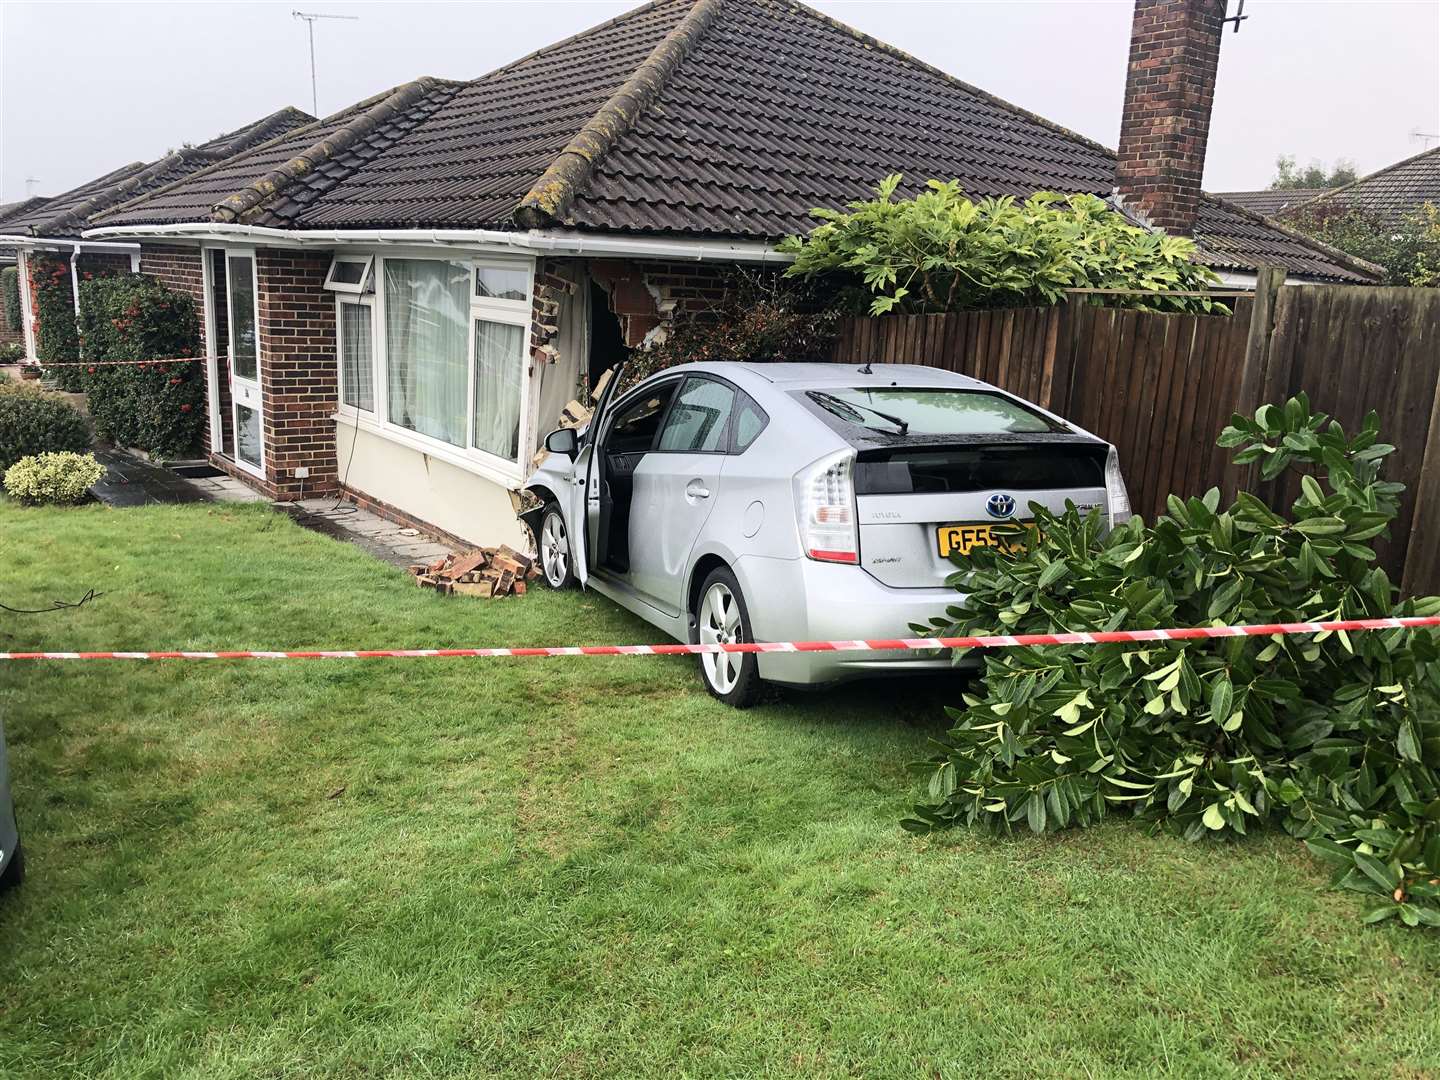 A car crashed into a bungalow in Nursery Avenue, Bearsted (19354114)